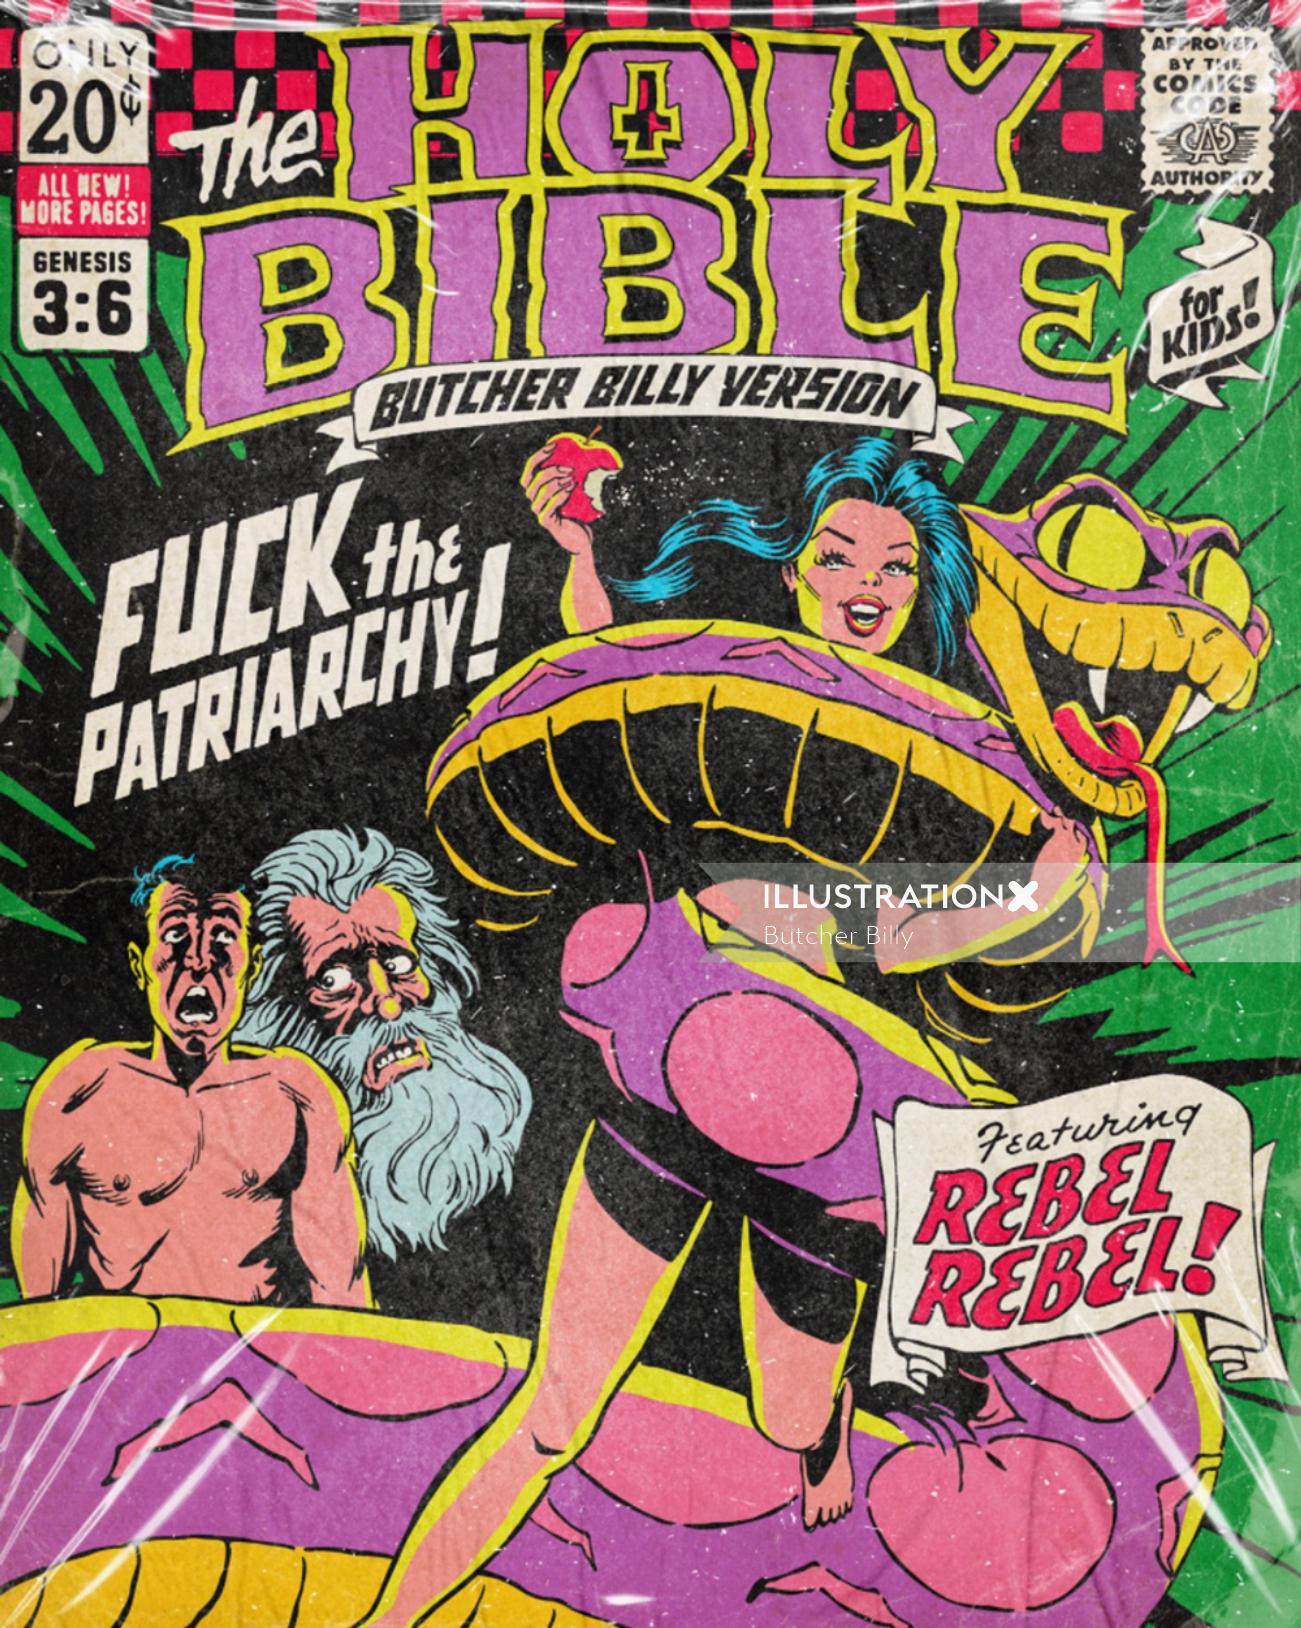 The 21 Holy Bible paintings by Butcher Billy are a blasphemous NFT series